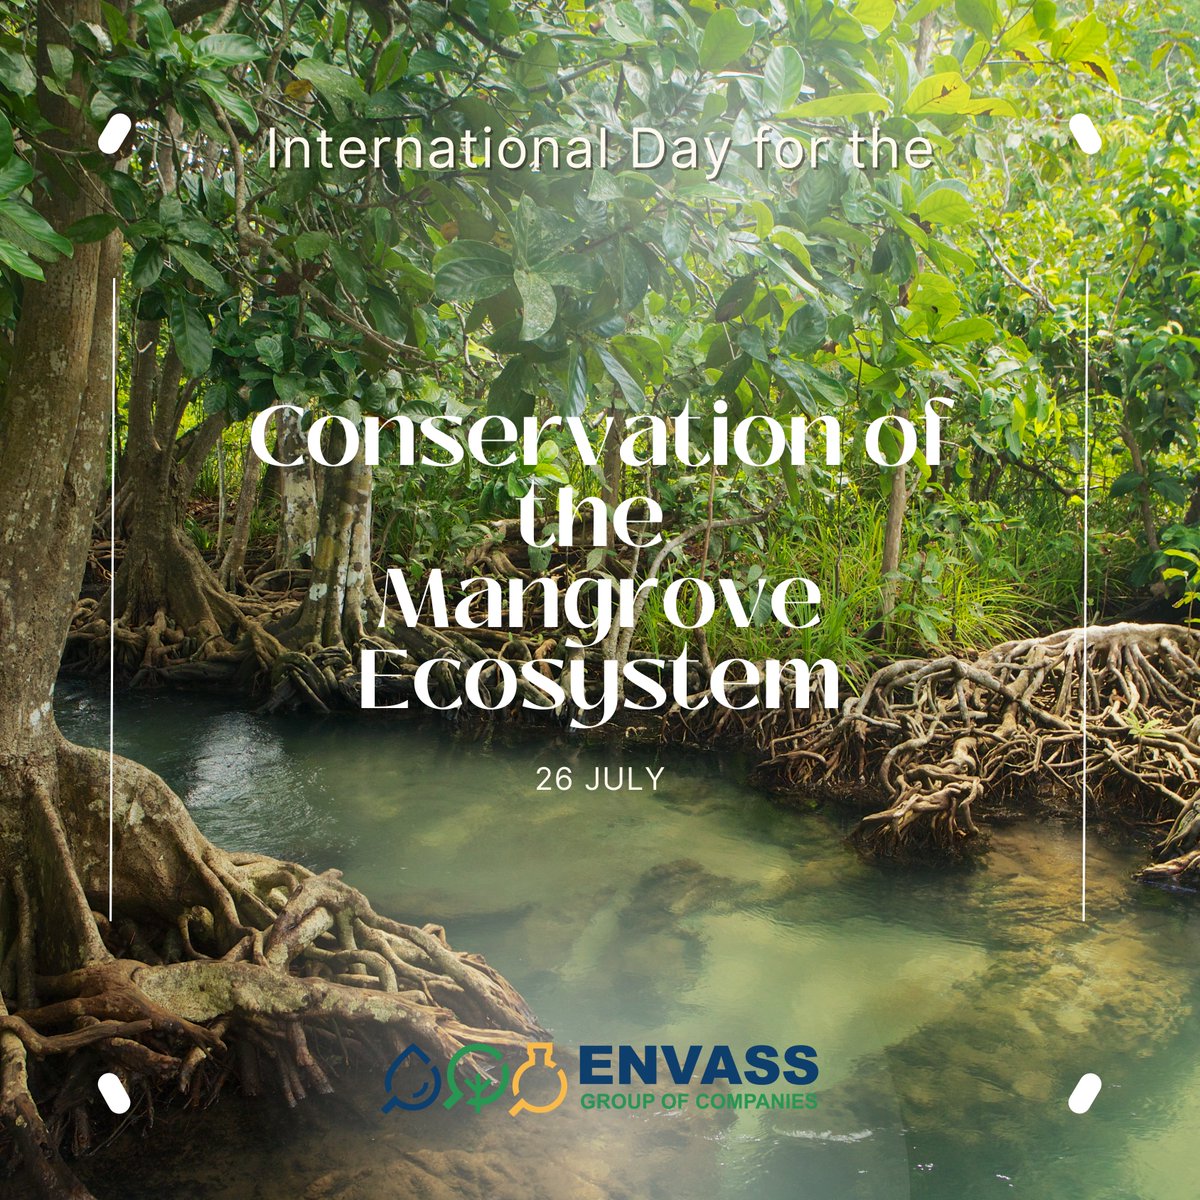 Happy International Day for the Conservation of the Mangrove Ecosystem

Raise awareness of the importance of mangrove ecosystems as “a unique, special and vulnerable ecosystem”
#MangroveConservation #InternationalMangroveDay #ProtectOurEcosystems #BiodiversityMatters